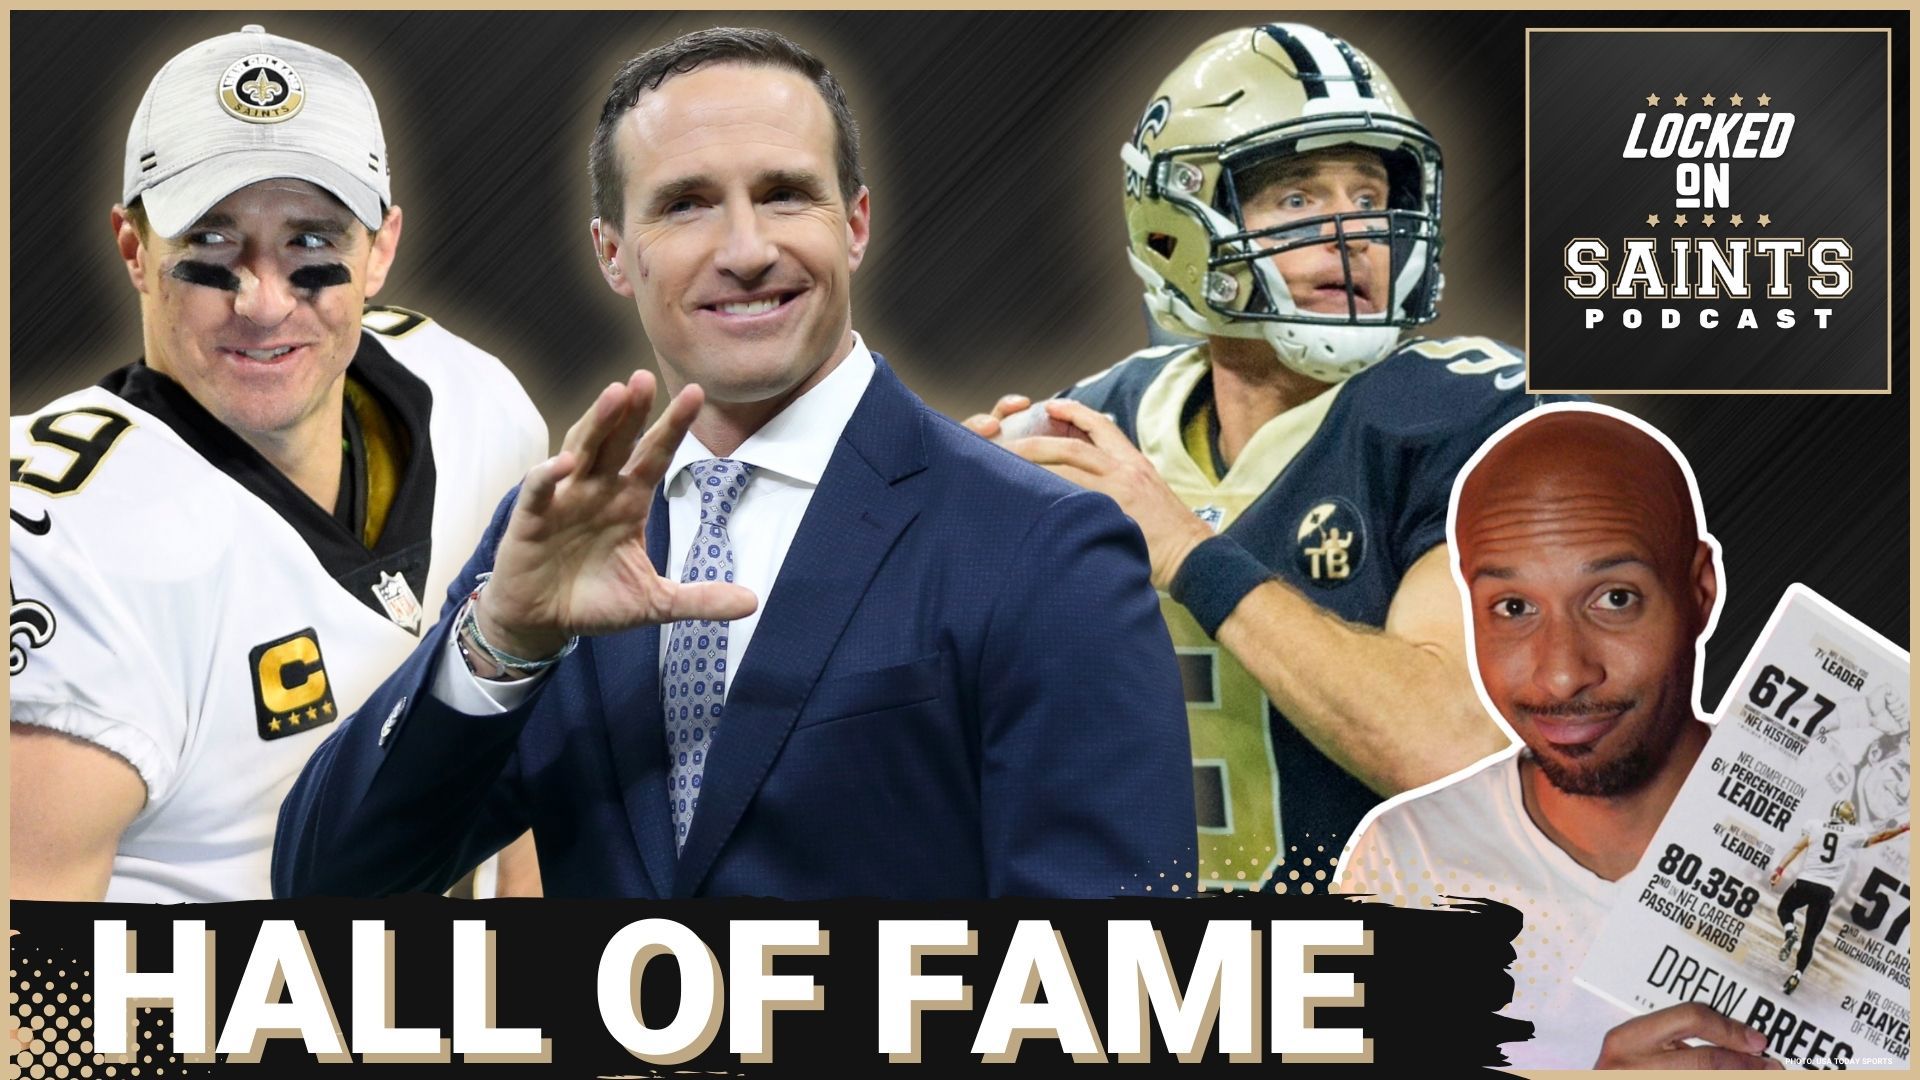 The New Orleans Saints announced that Drew Brees will be inducted into the team's Hall of Fame, and they should have their game celebration Week 7 against Denver.